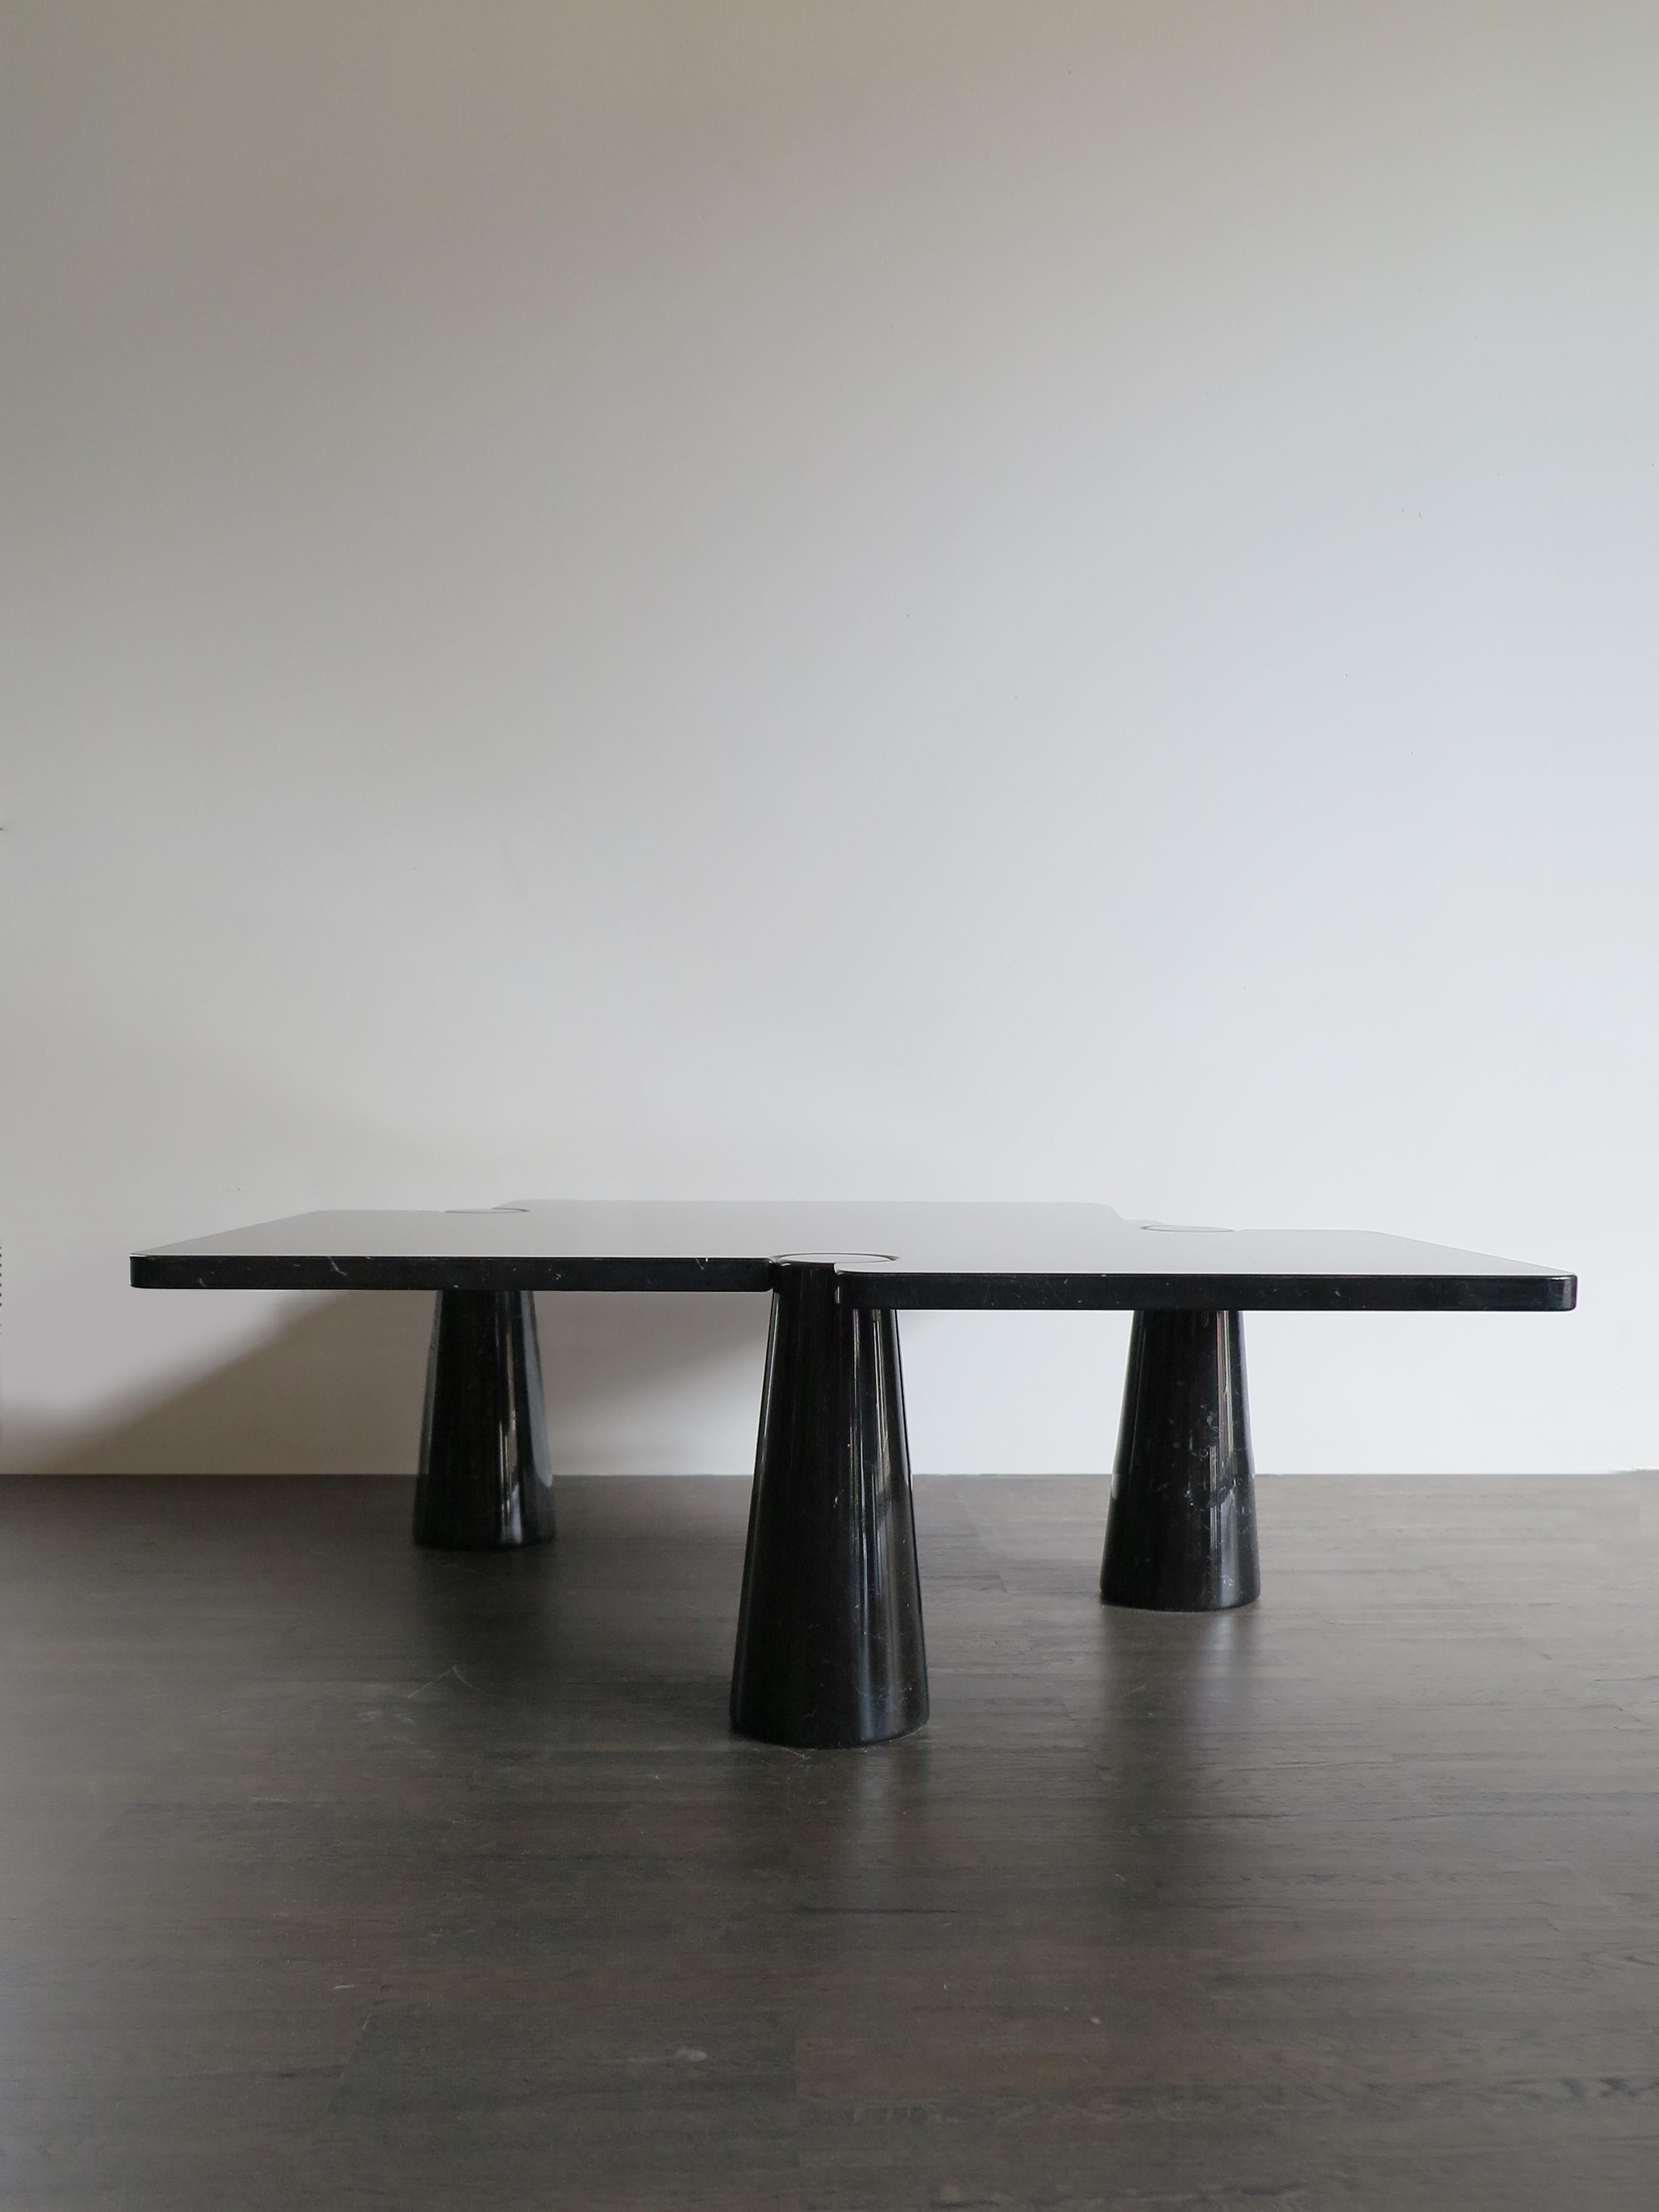 Italian very rare and big coffee table or sofa table, Eros series model Freccia, in Black Marquinia Marble designed by Angelo Mangiarotti for Skipper, circa 1970s.

This large table of minimal and contemporary design is perfect for luxury